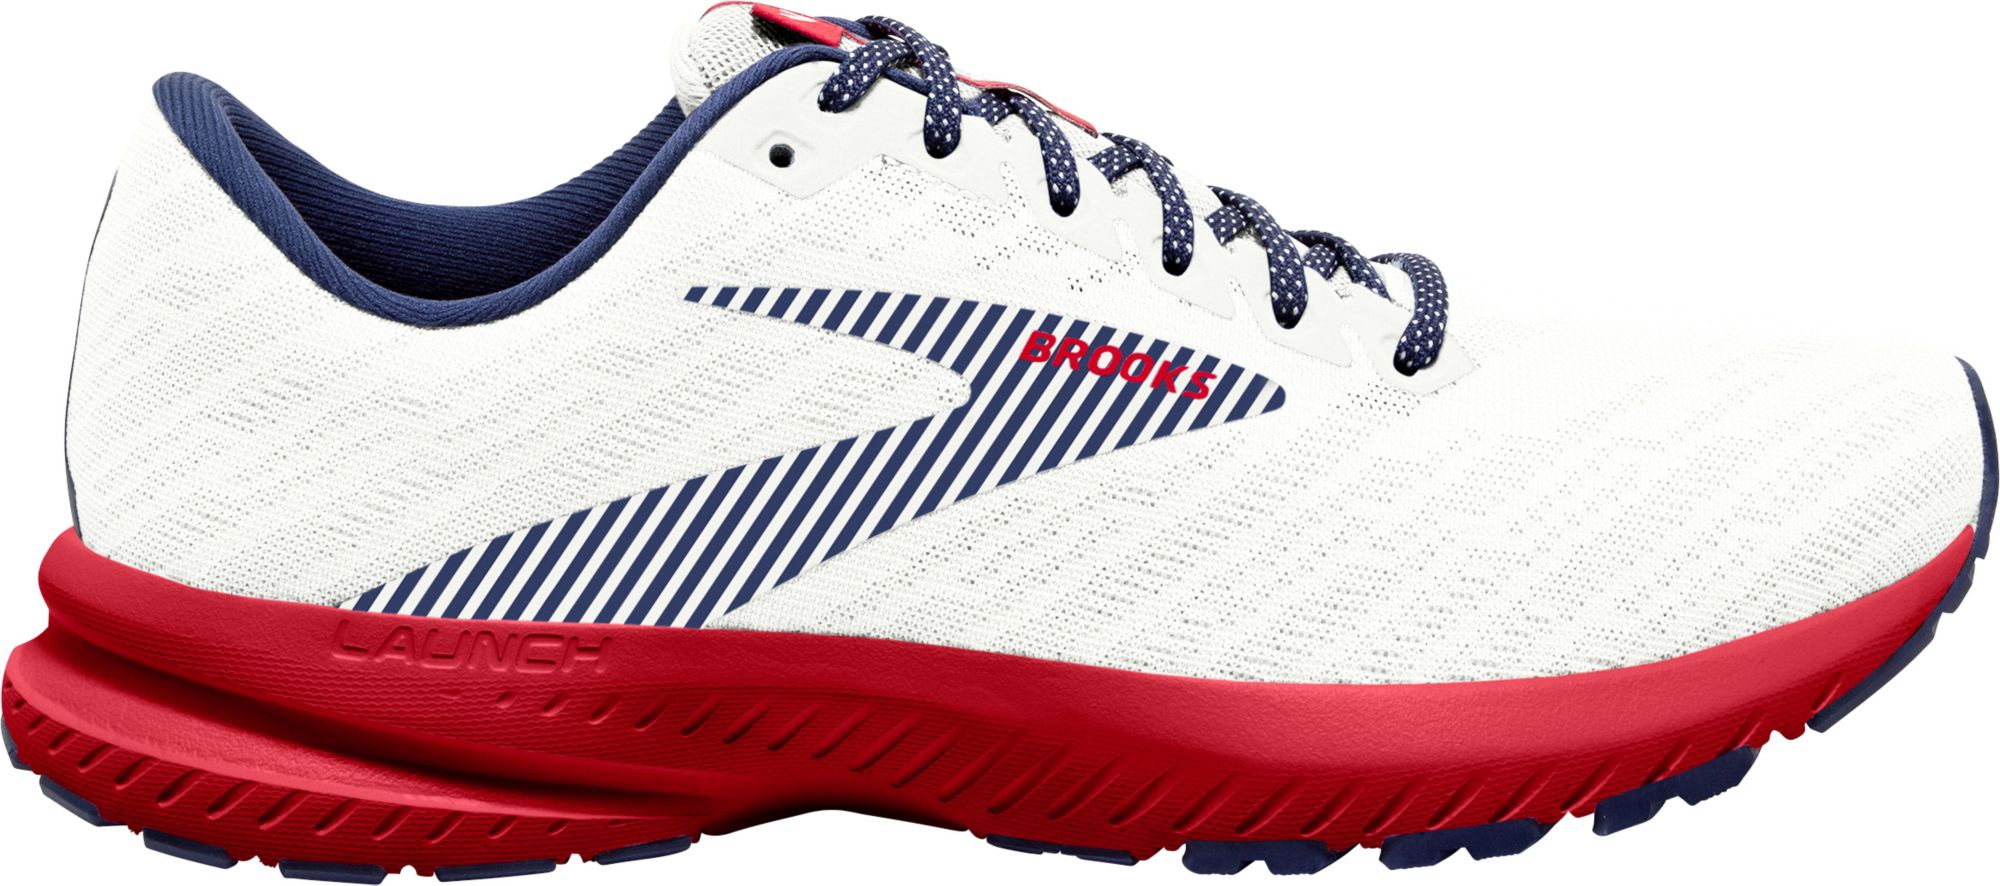 brooks launch red white blue 